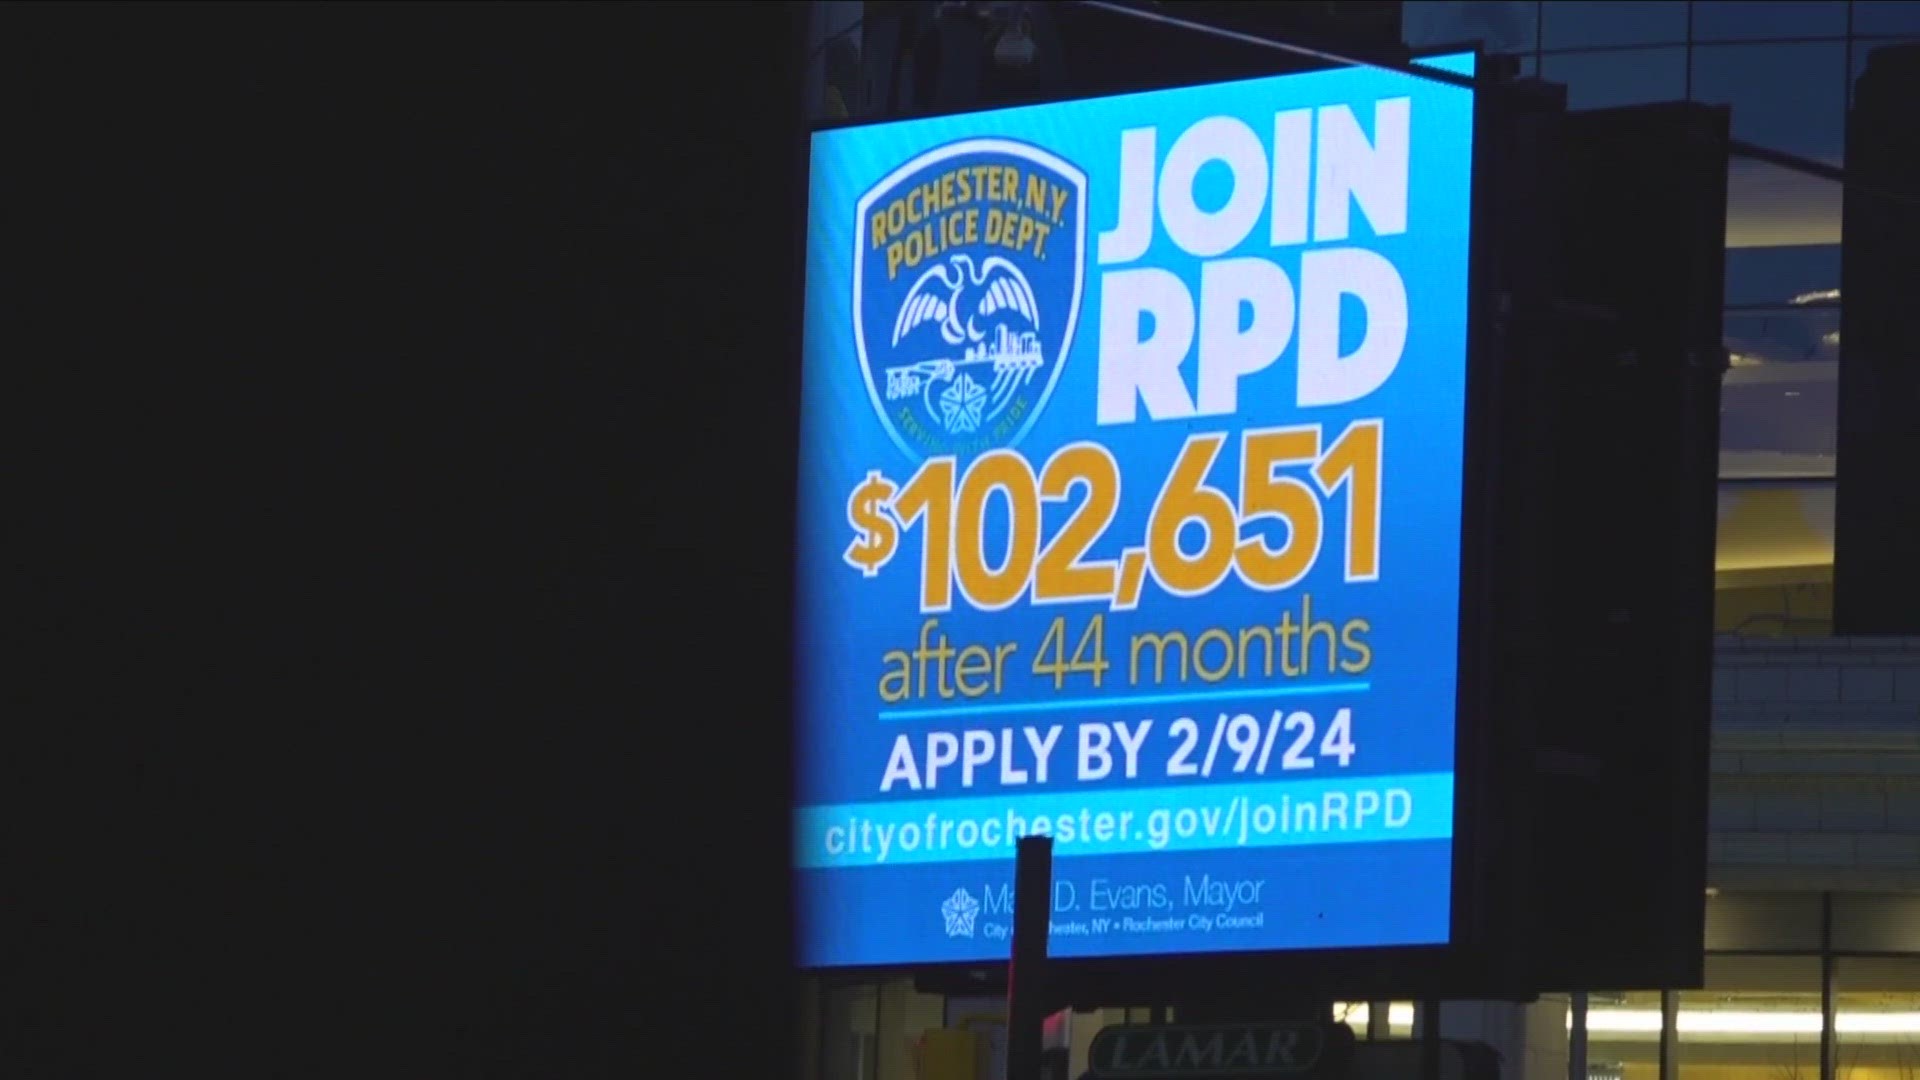 One Downtown billboard promises a six figure salary after 44 months of service.